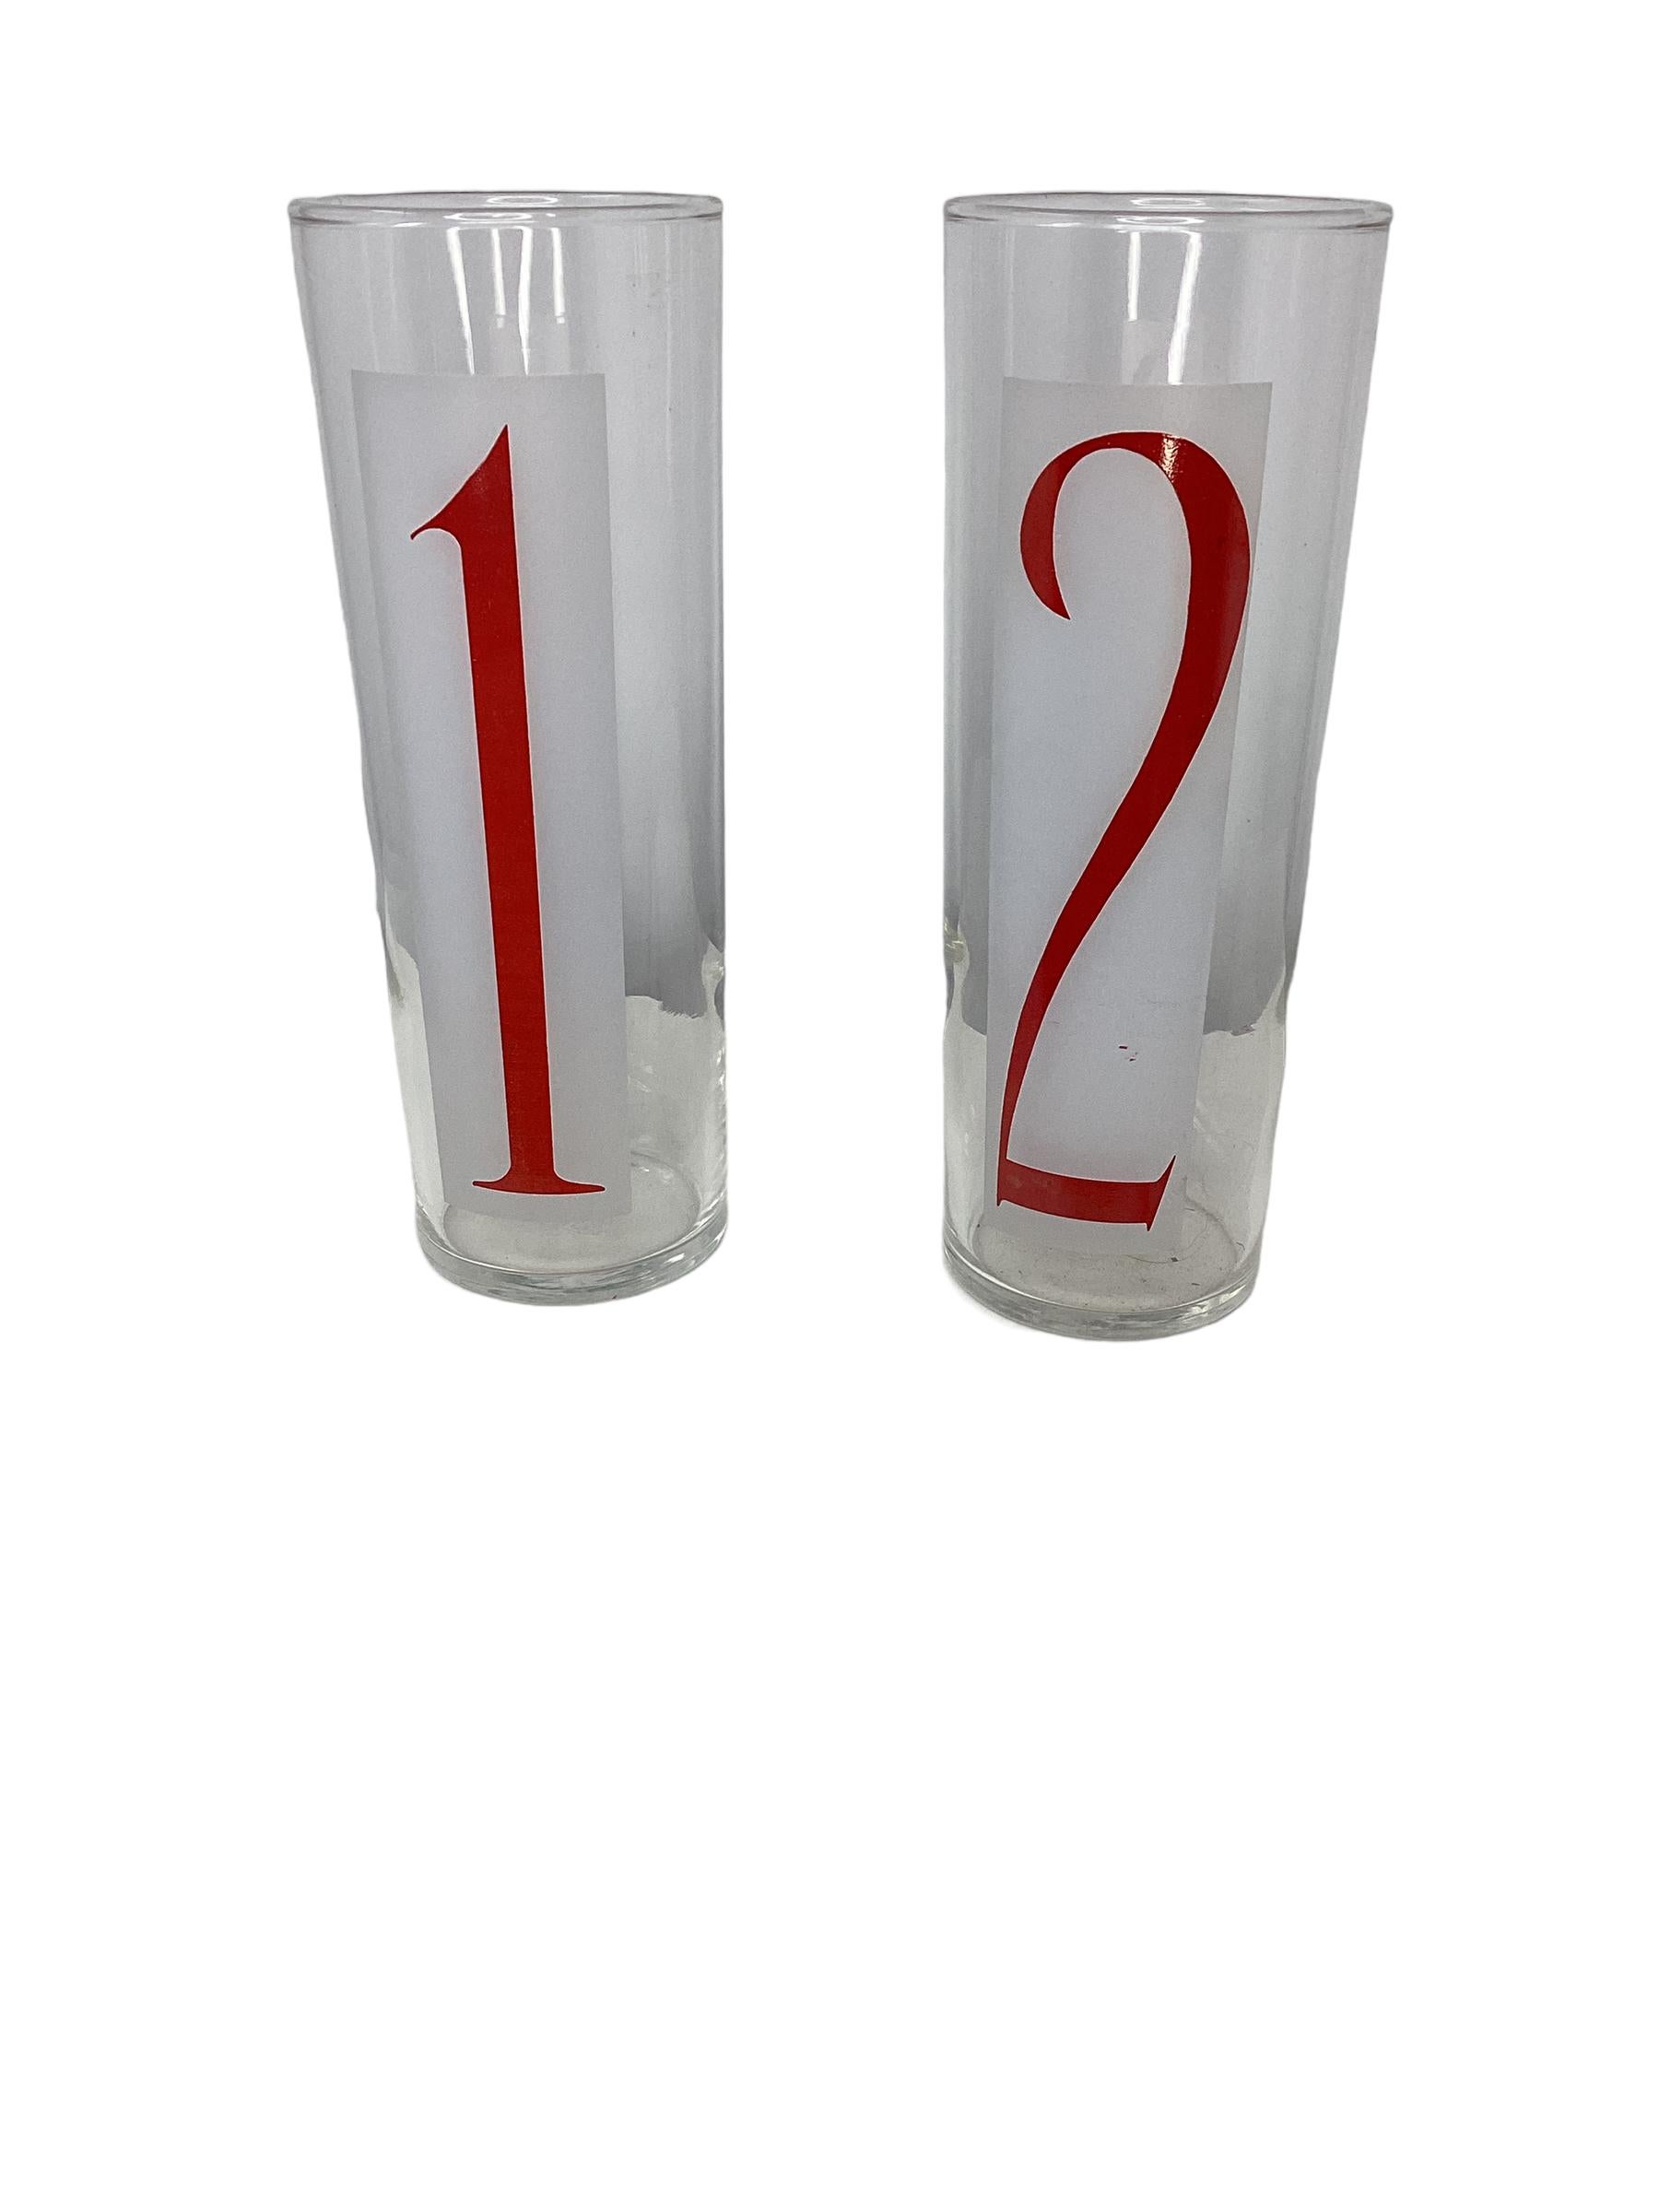 Set of 8 Vintage Federal Glass Drinks By Numbers Coolers. Tall slender glasses with numbers 1-8 printed in red bold numbers on a frosted background. Perfect for summer cocktail.